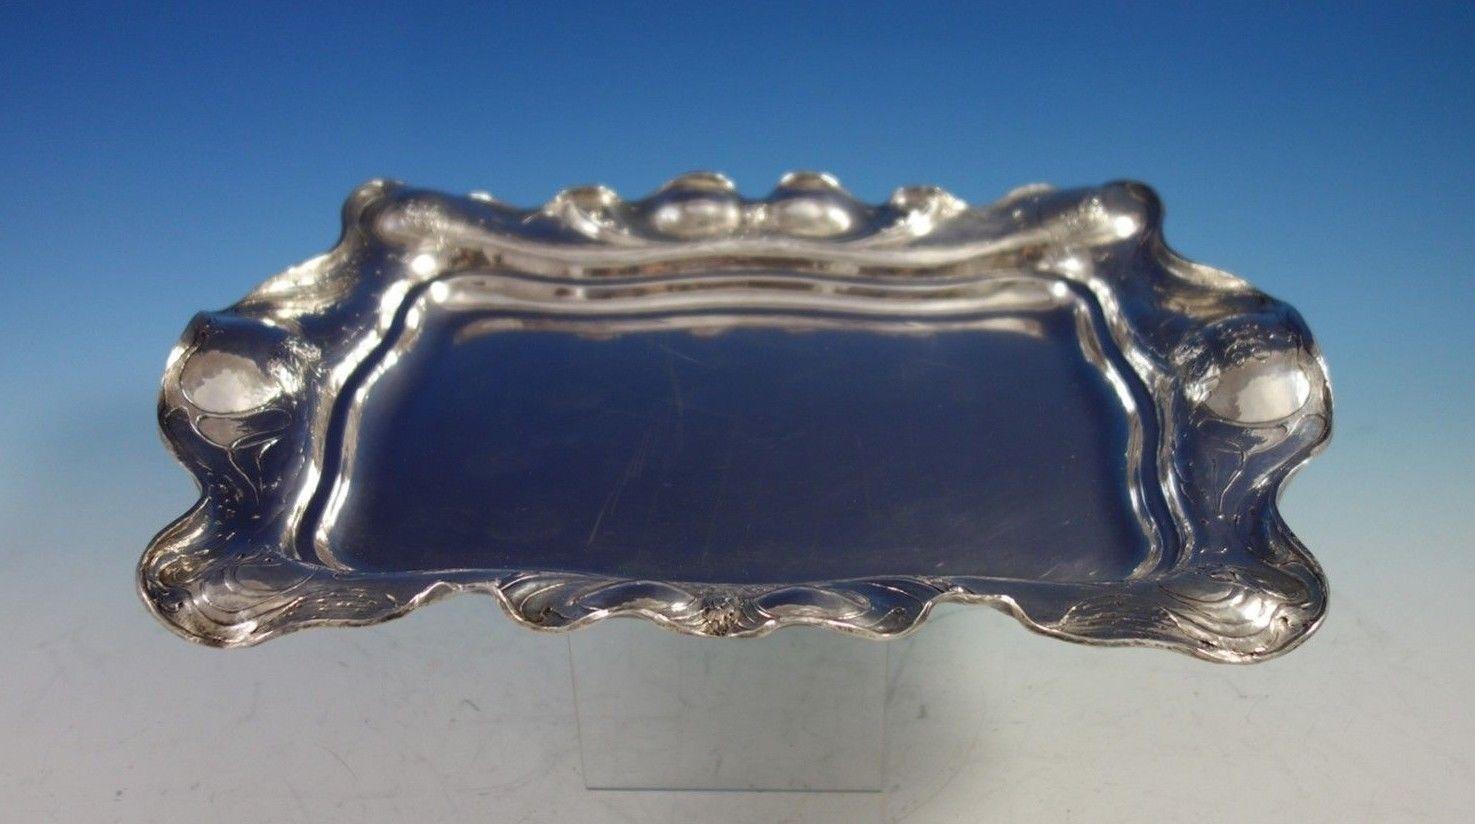 Martele by Gorham
Exceedingly Rare Martele by Gorham sterling silver asparagus tray with chased asparagus design. There were only eight Martele asparagus trays made. This one was made August 28, 1899.
This tray is marked #2224, measures 14 1/2 x 10